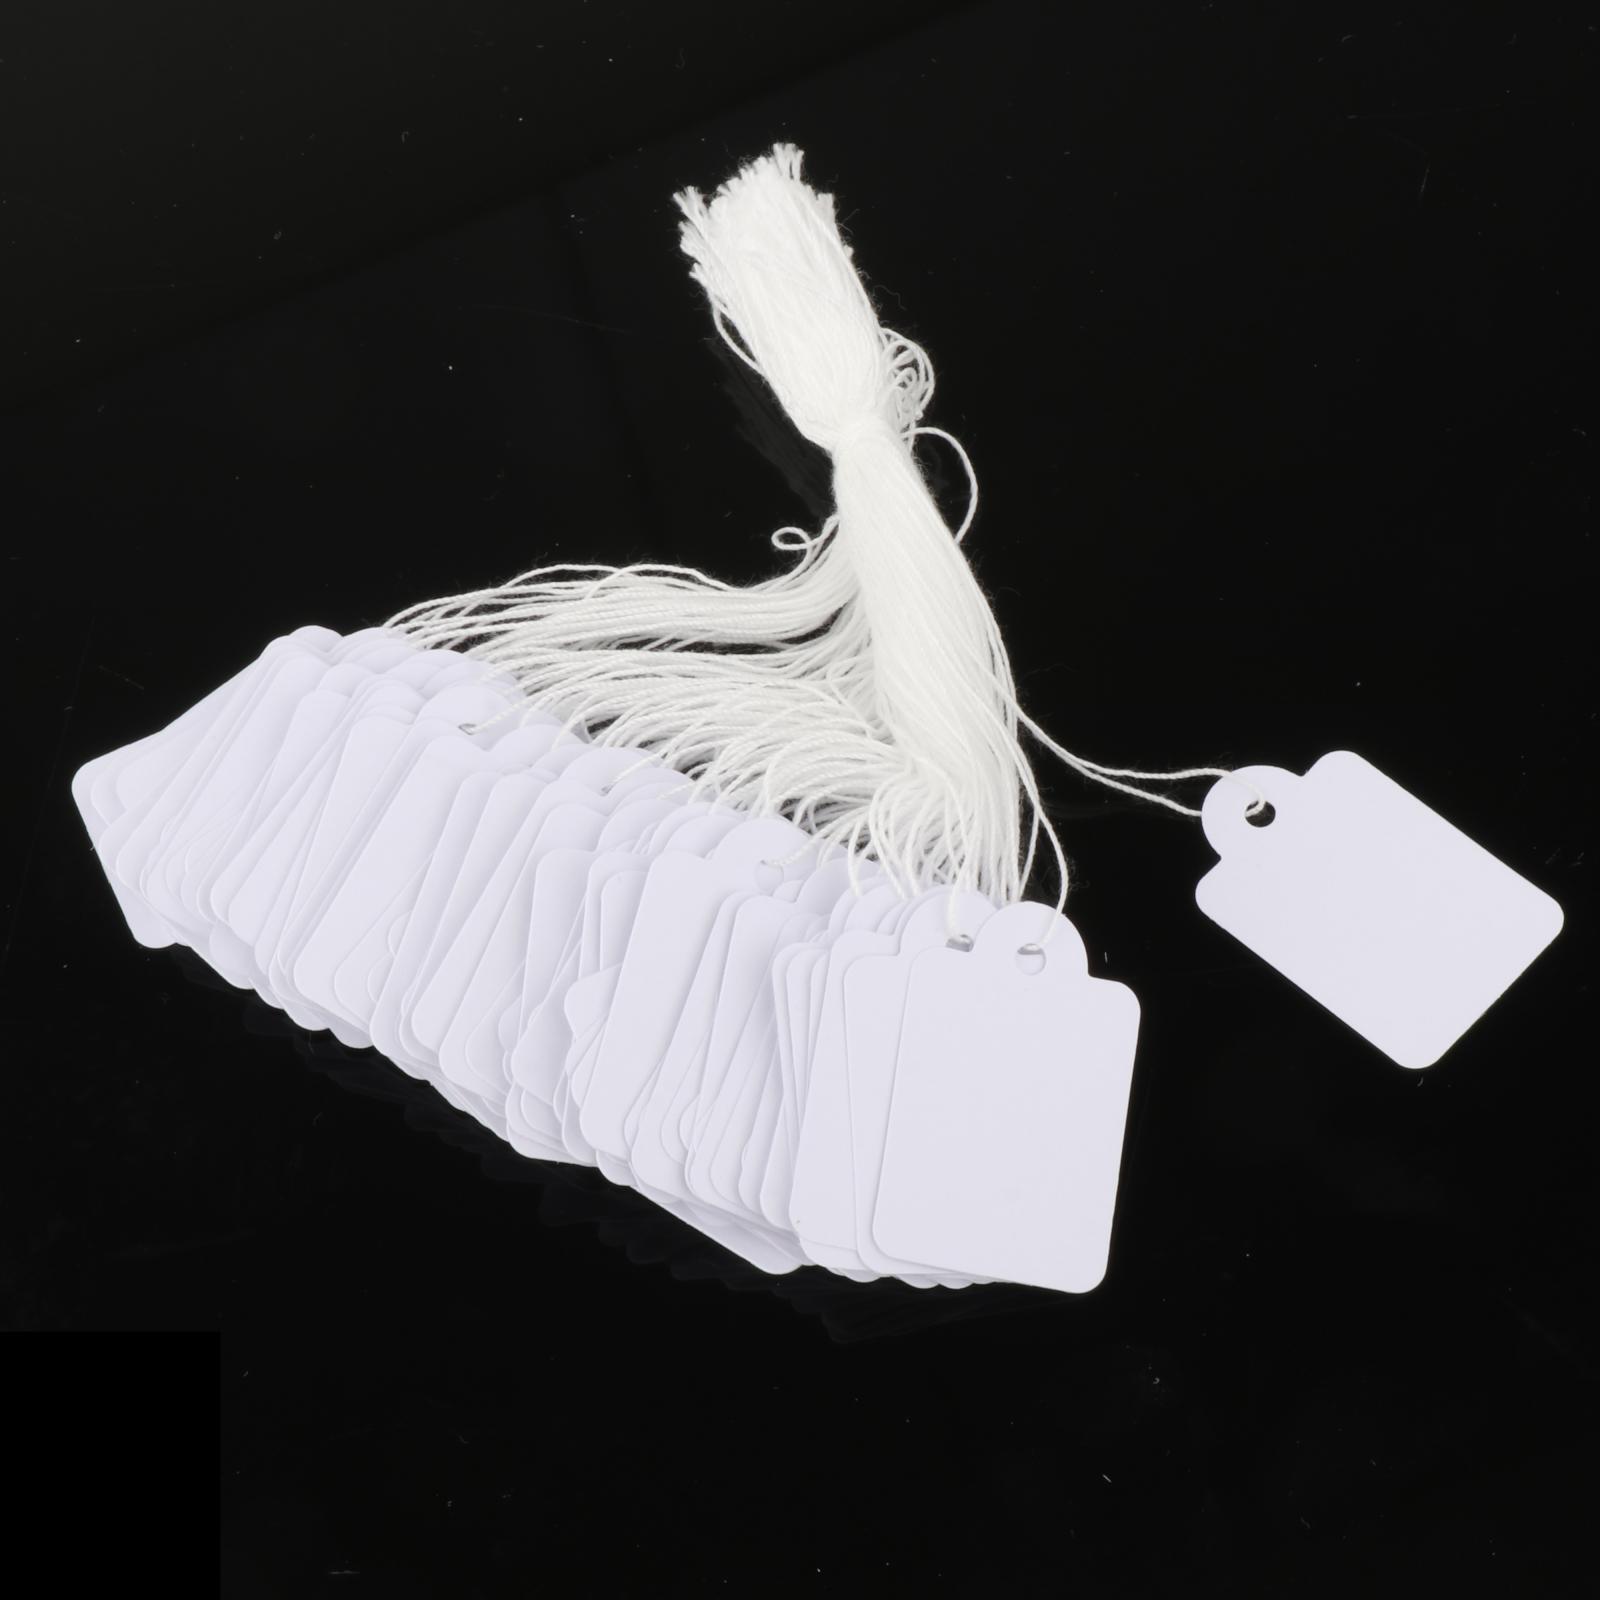 100Pcs Labeling Tags Blank Gift Tags with String Attached Marking Strung Tags Writable Paper Tags for Birthday Rings Clothing Wedding Retail